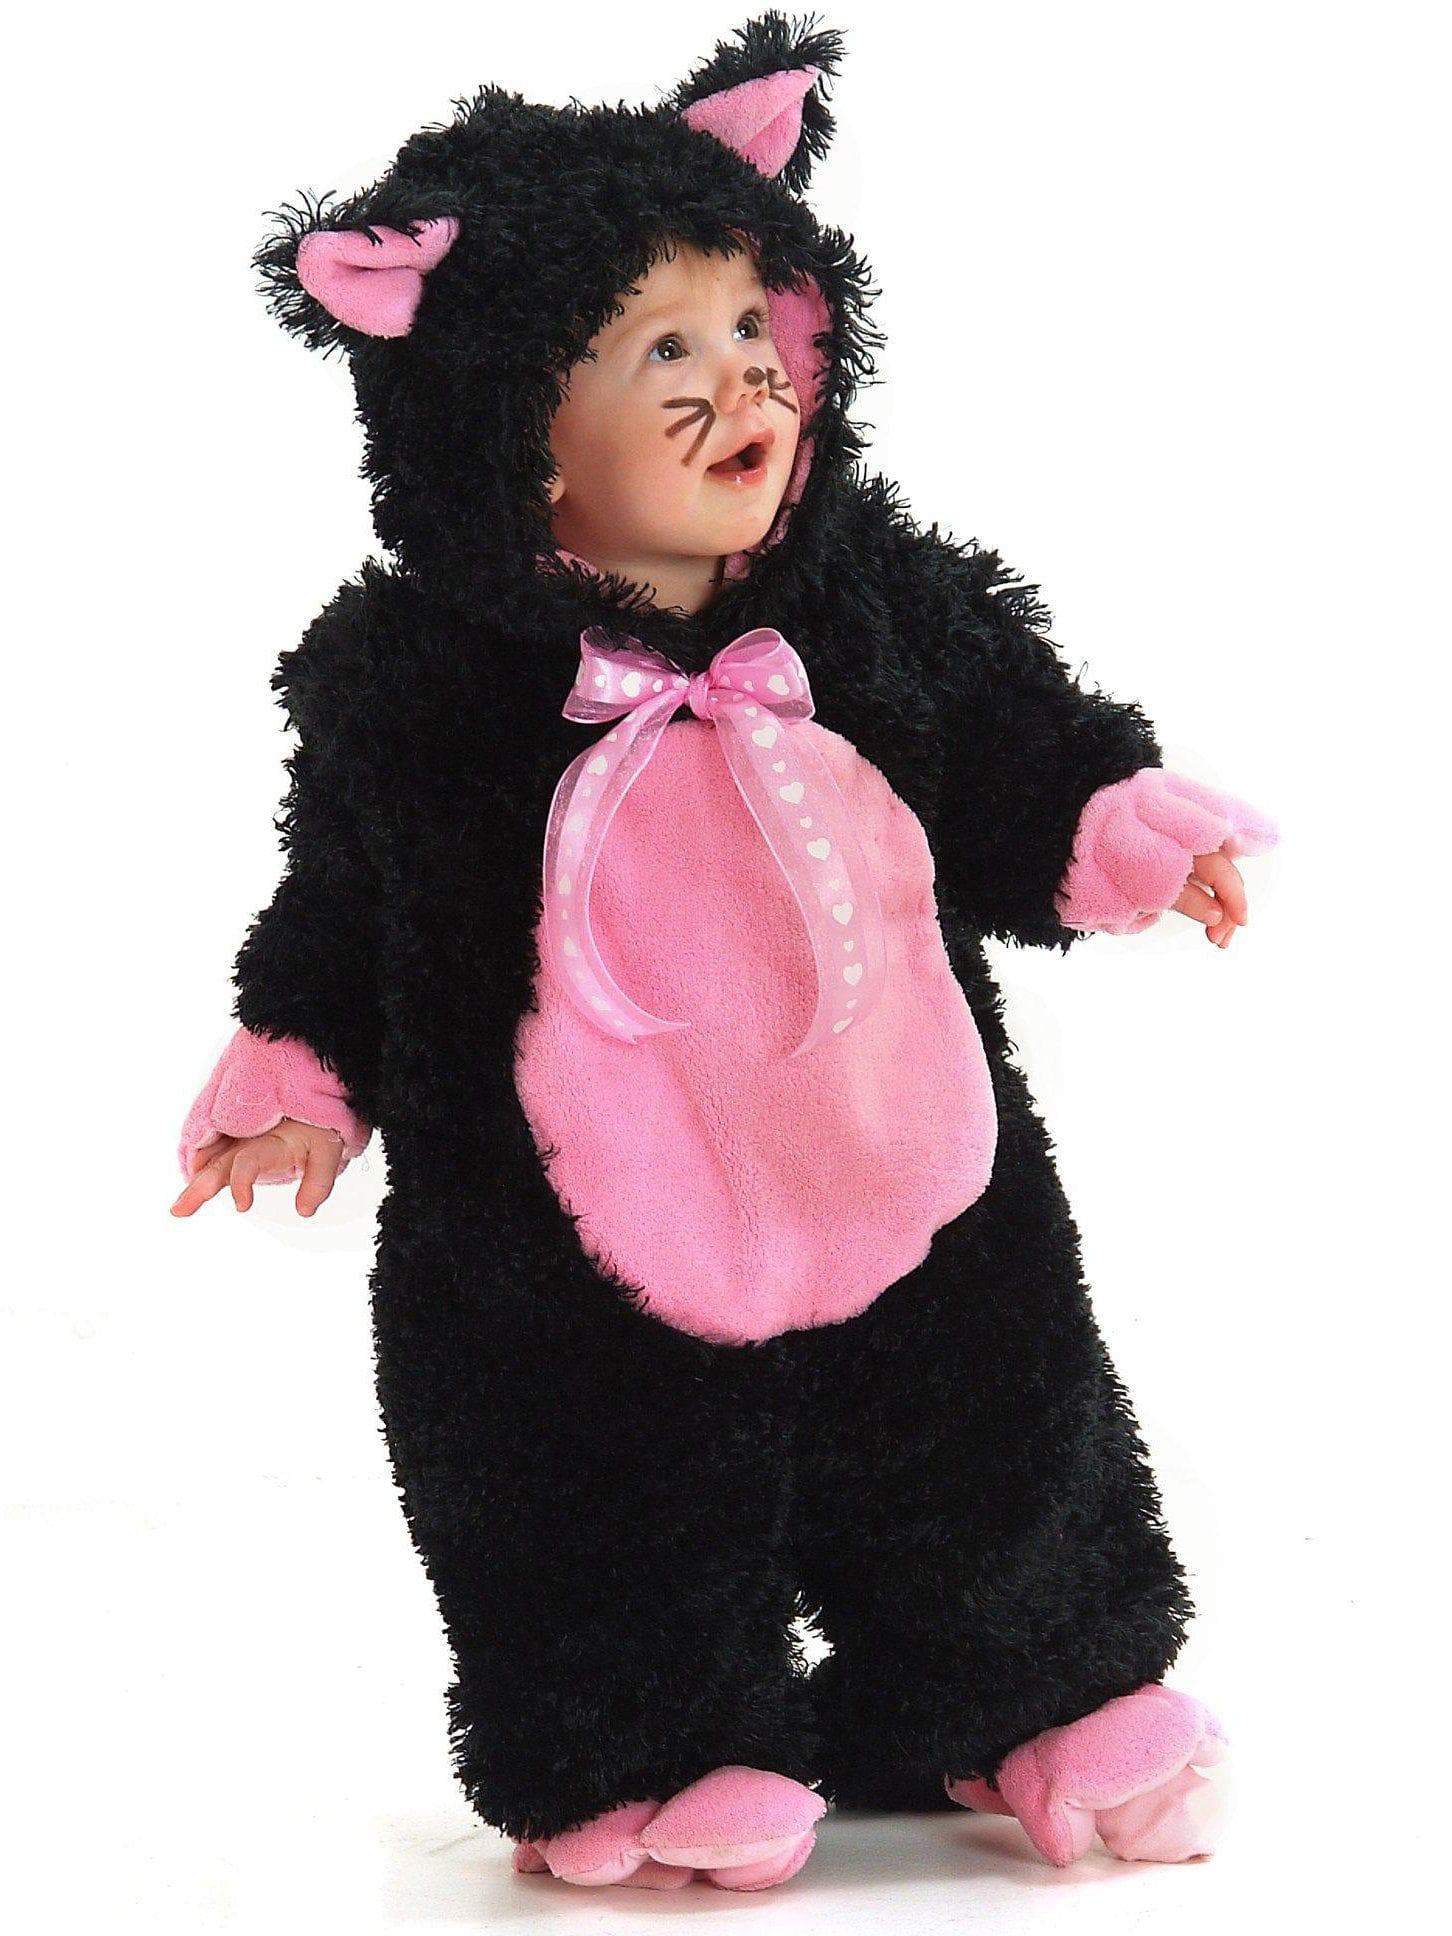 Baby/Toddler Black Kitty Costume - costumes.com